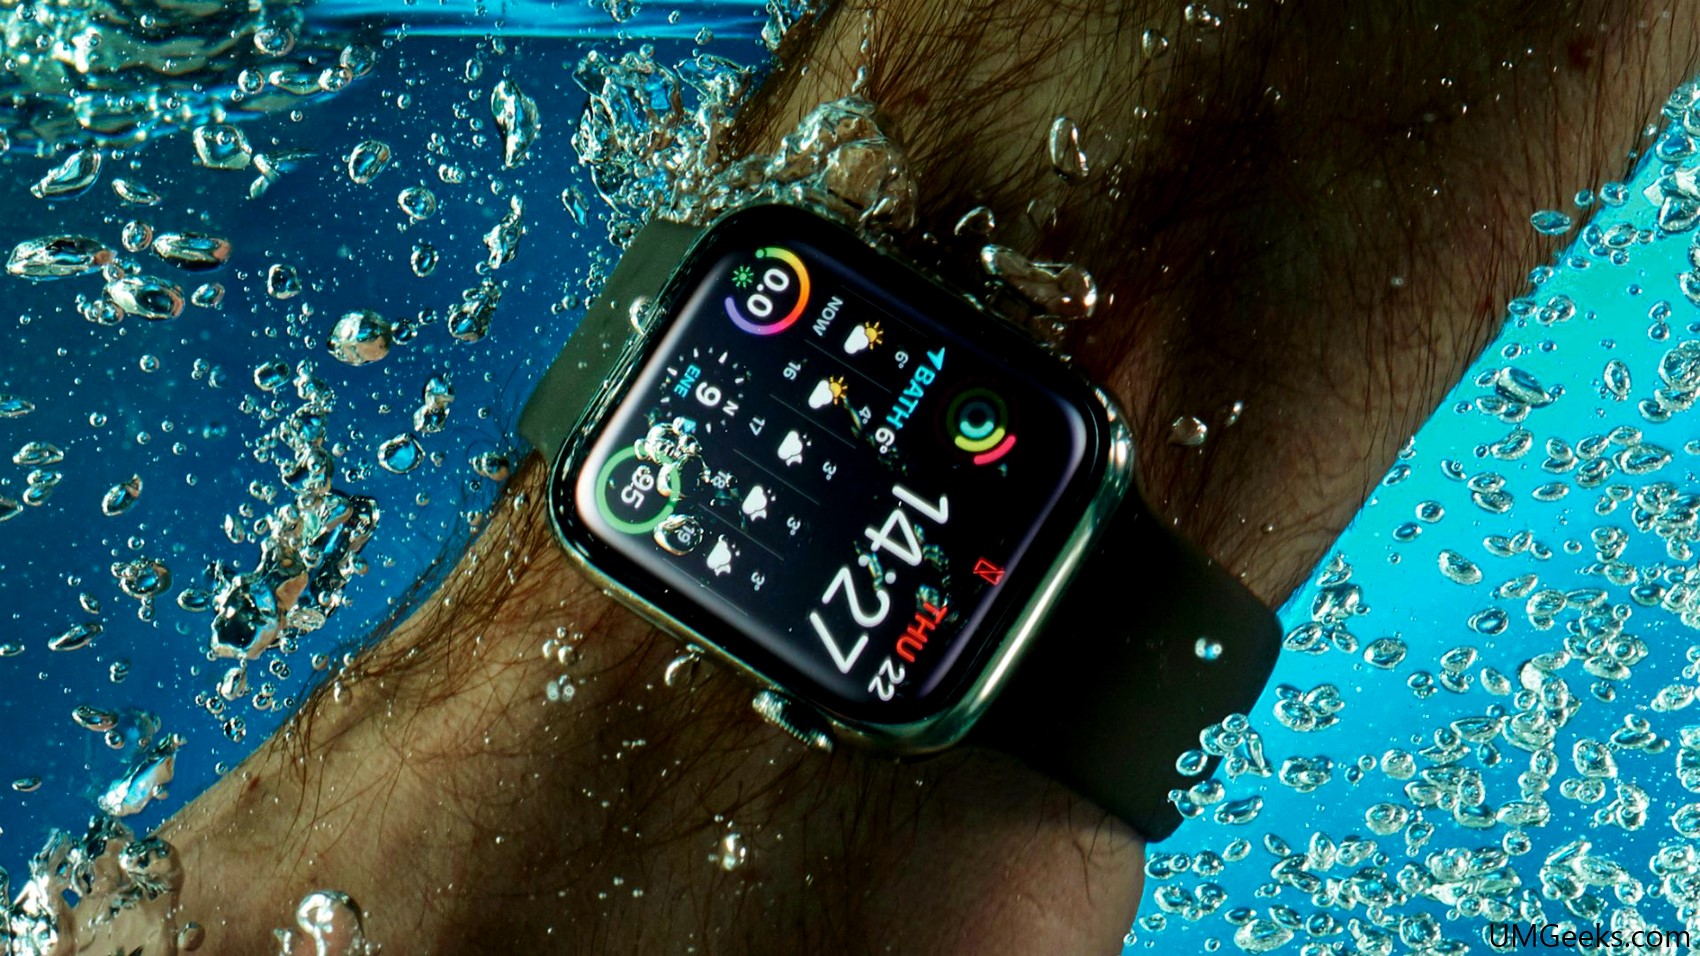 How to use function Apple watch water lock?